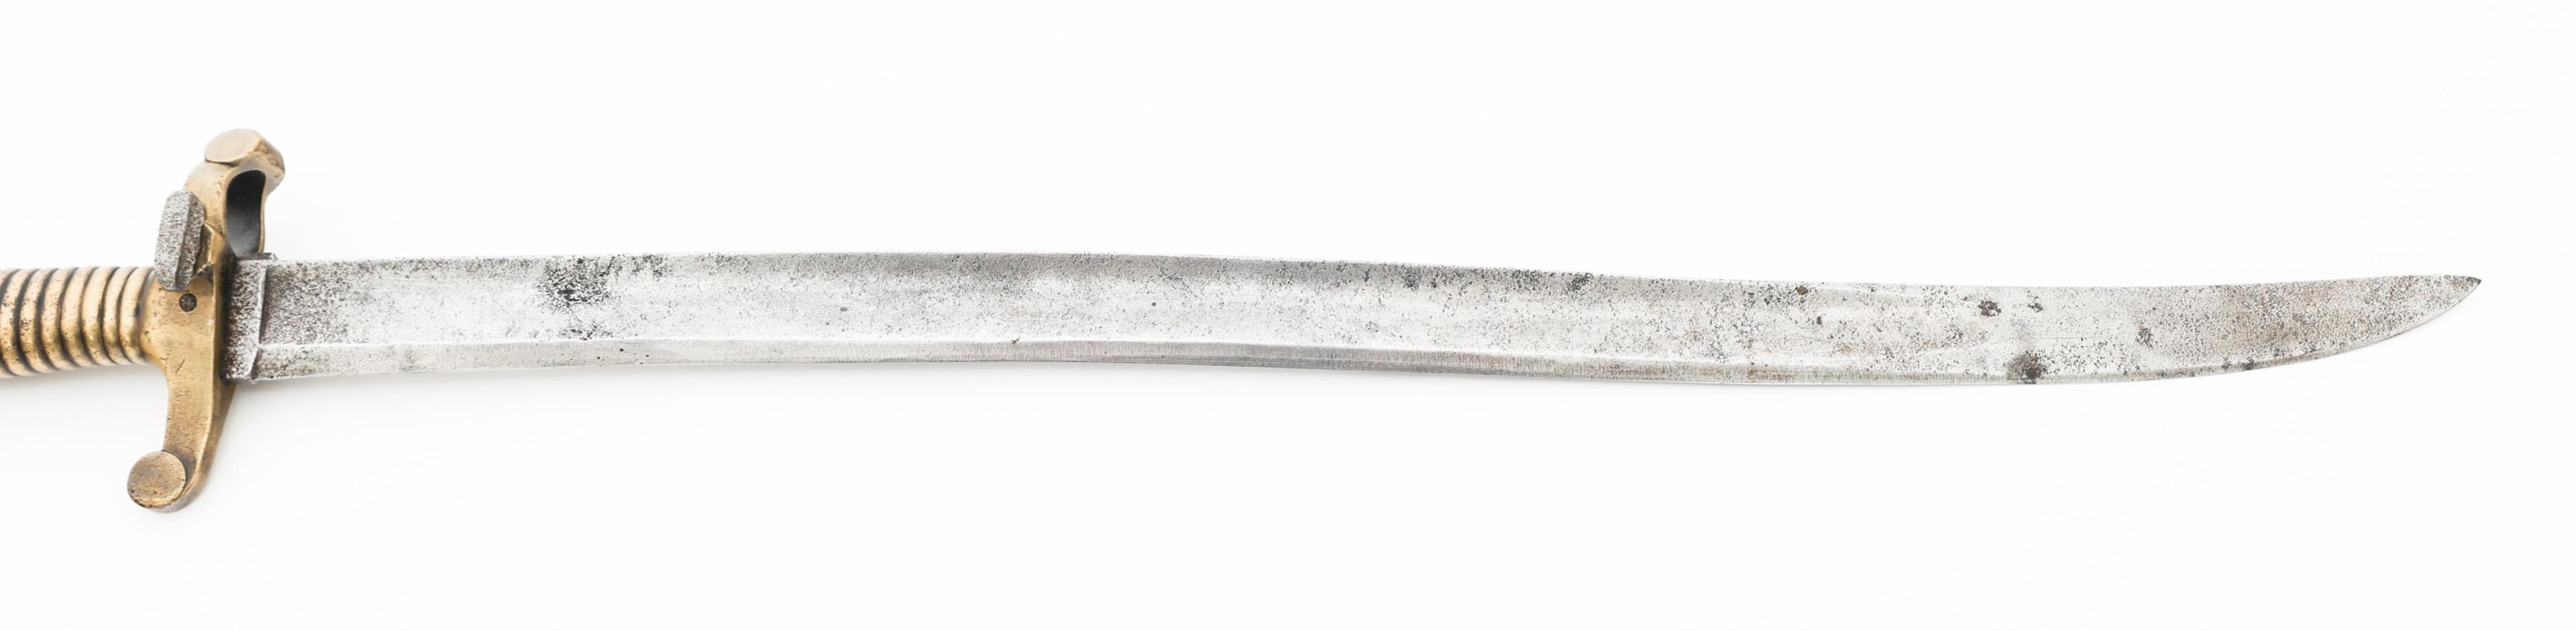 US M1841 MISSISSIPPI RIFLE TYPE 1 SNELL BAYONET